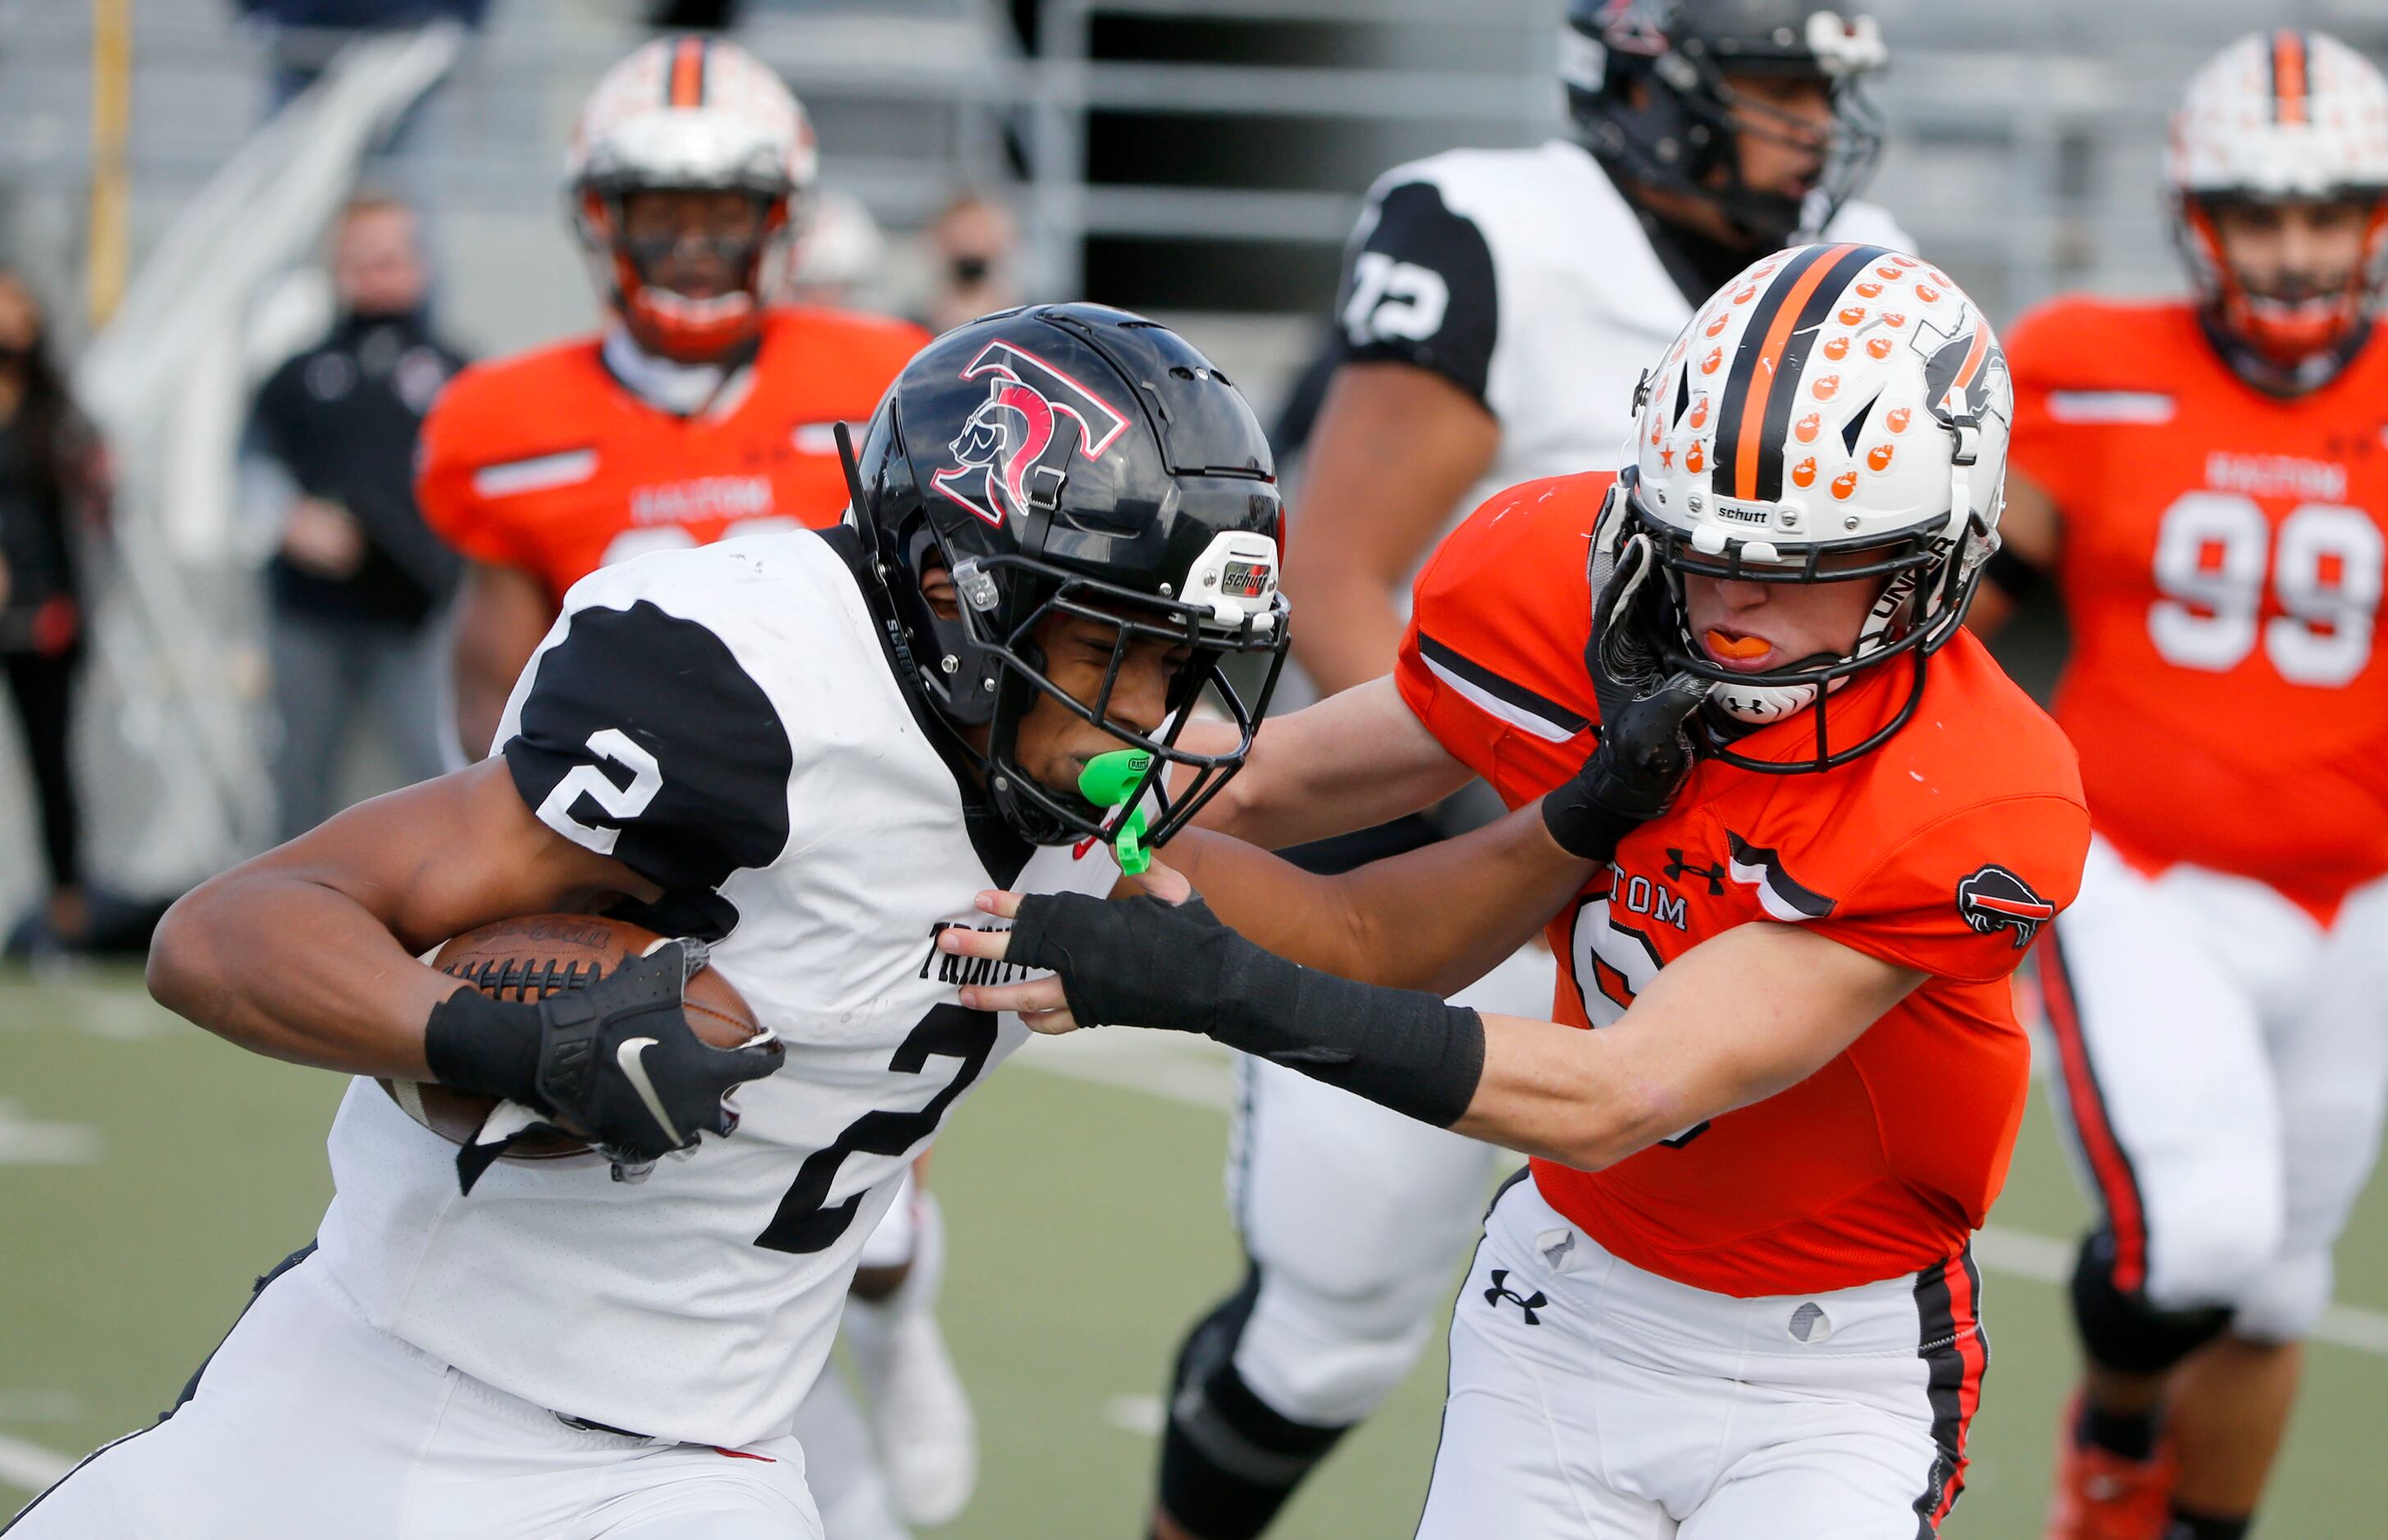 Euless Trinity running back Ollie Gordan (2) is tackled for a loss by Haltom safety Aaron...